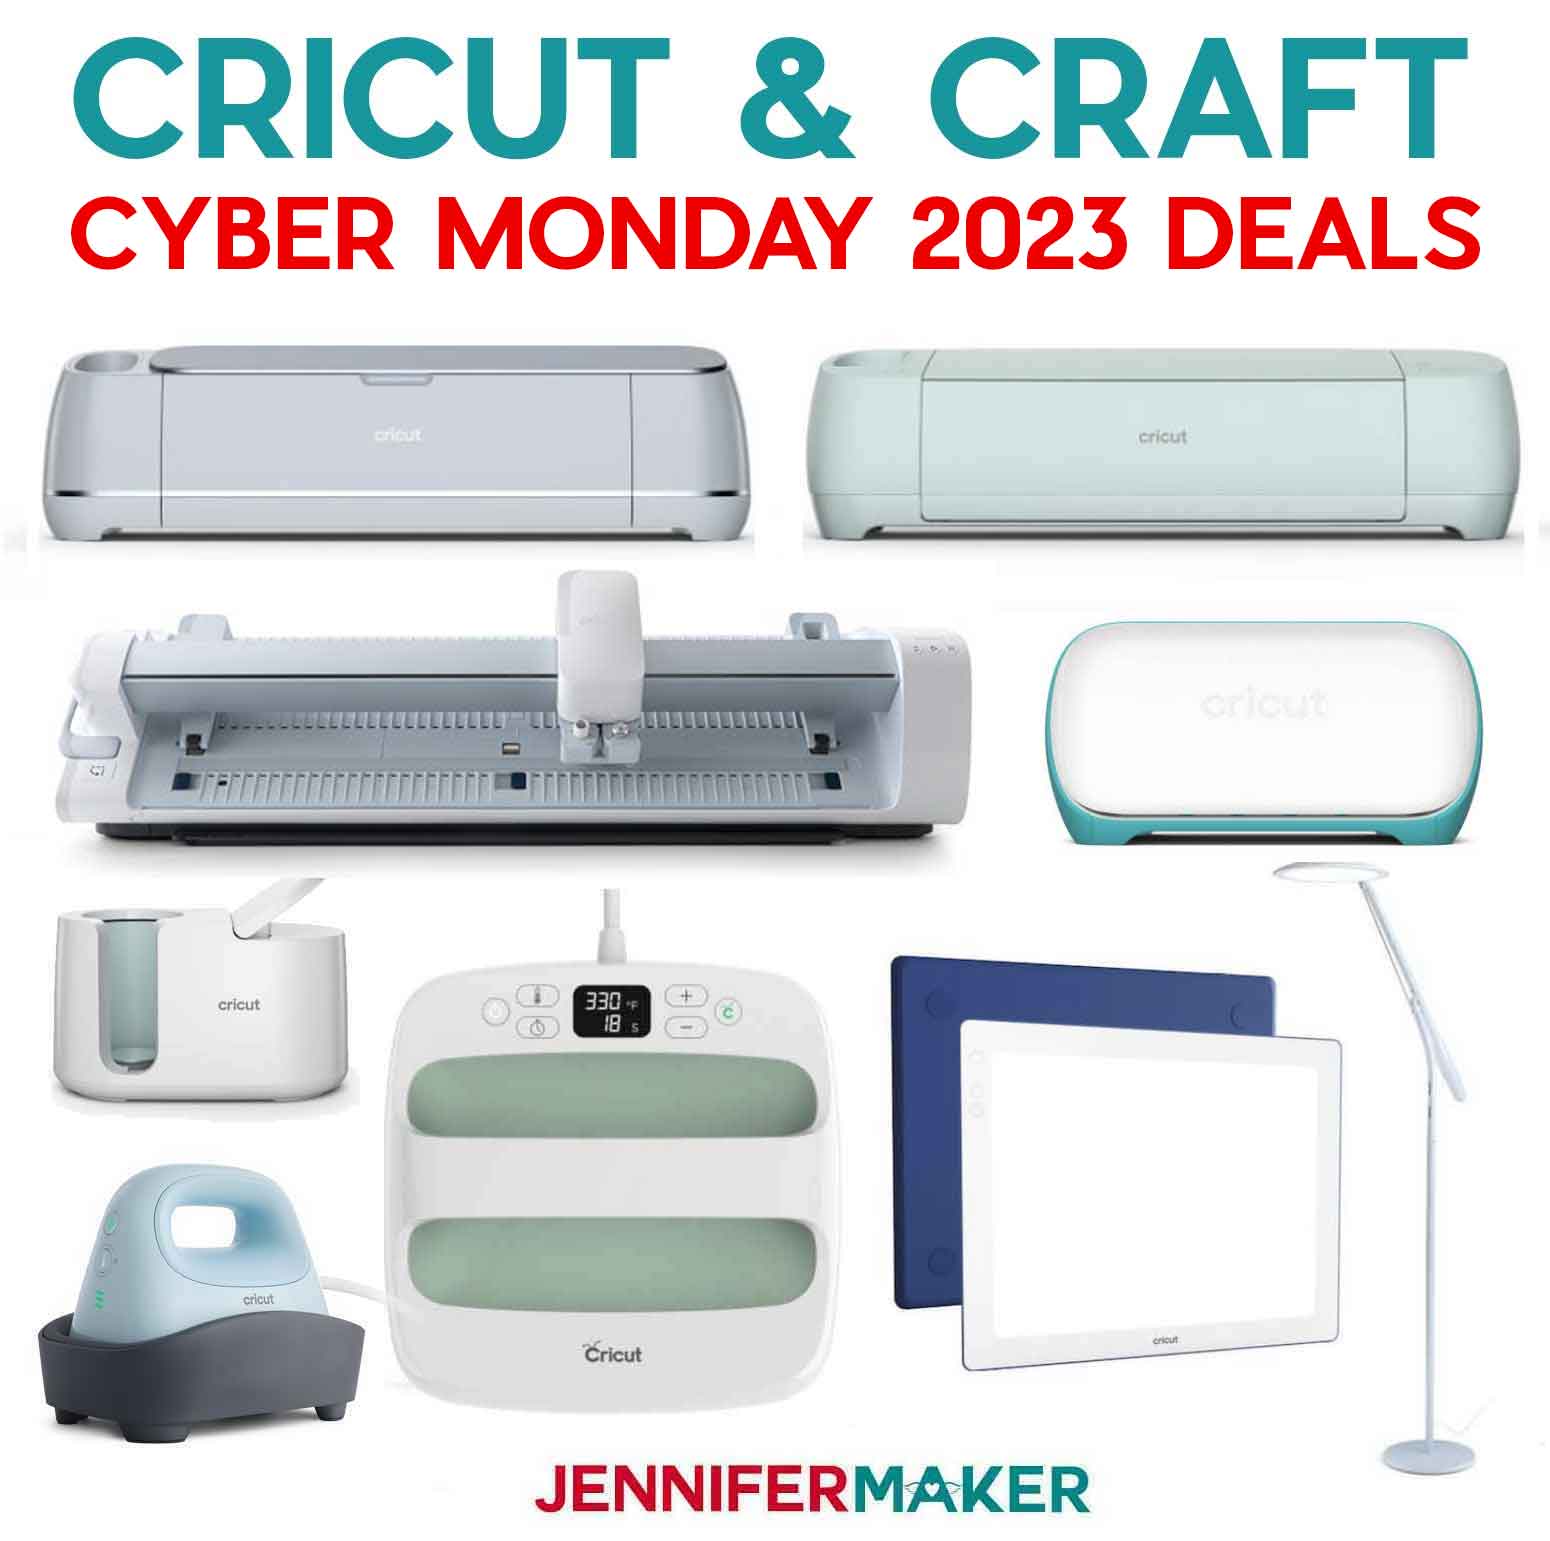 Black Friday/Cyber Monday Deals for Craft Lovers (Includes Cricut!)